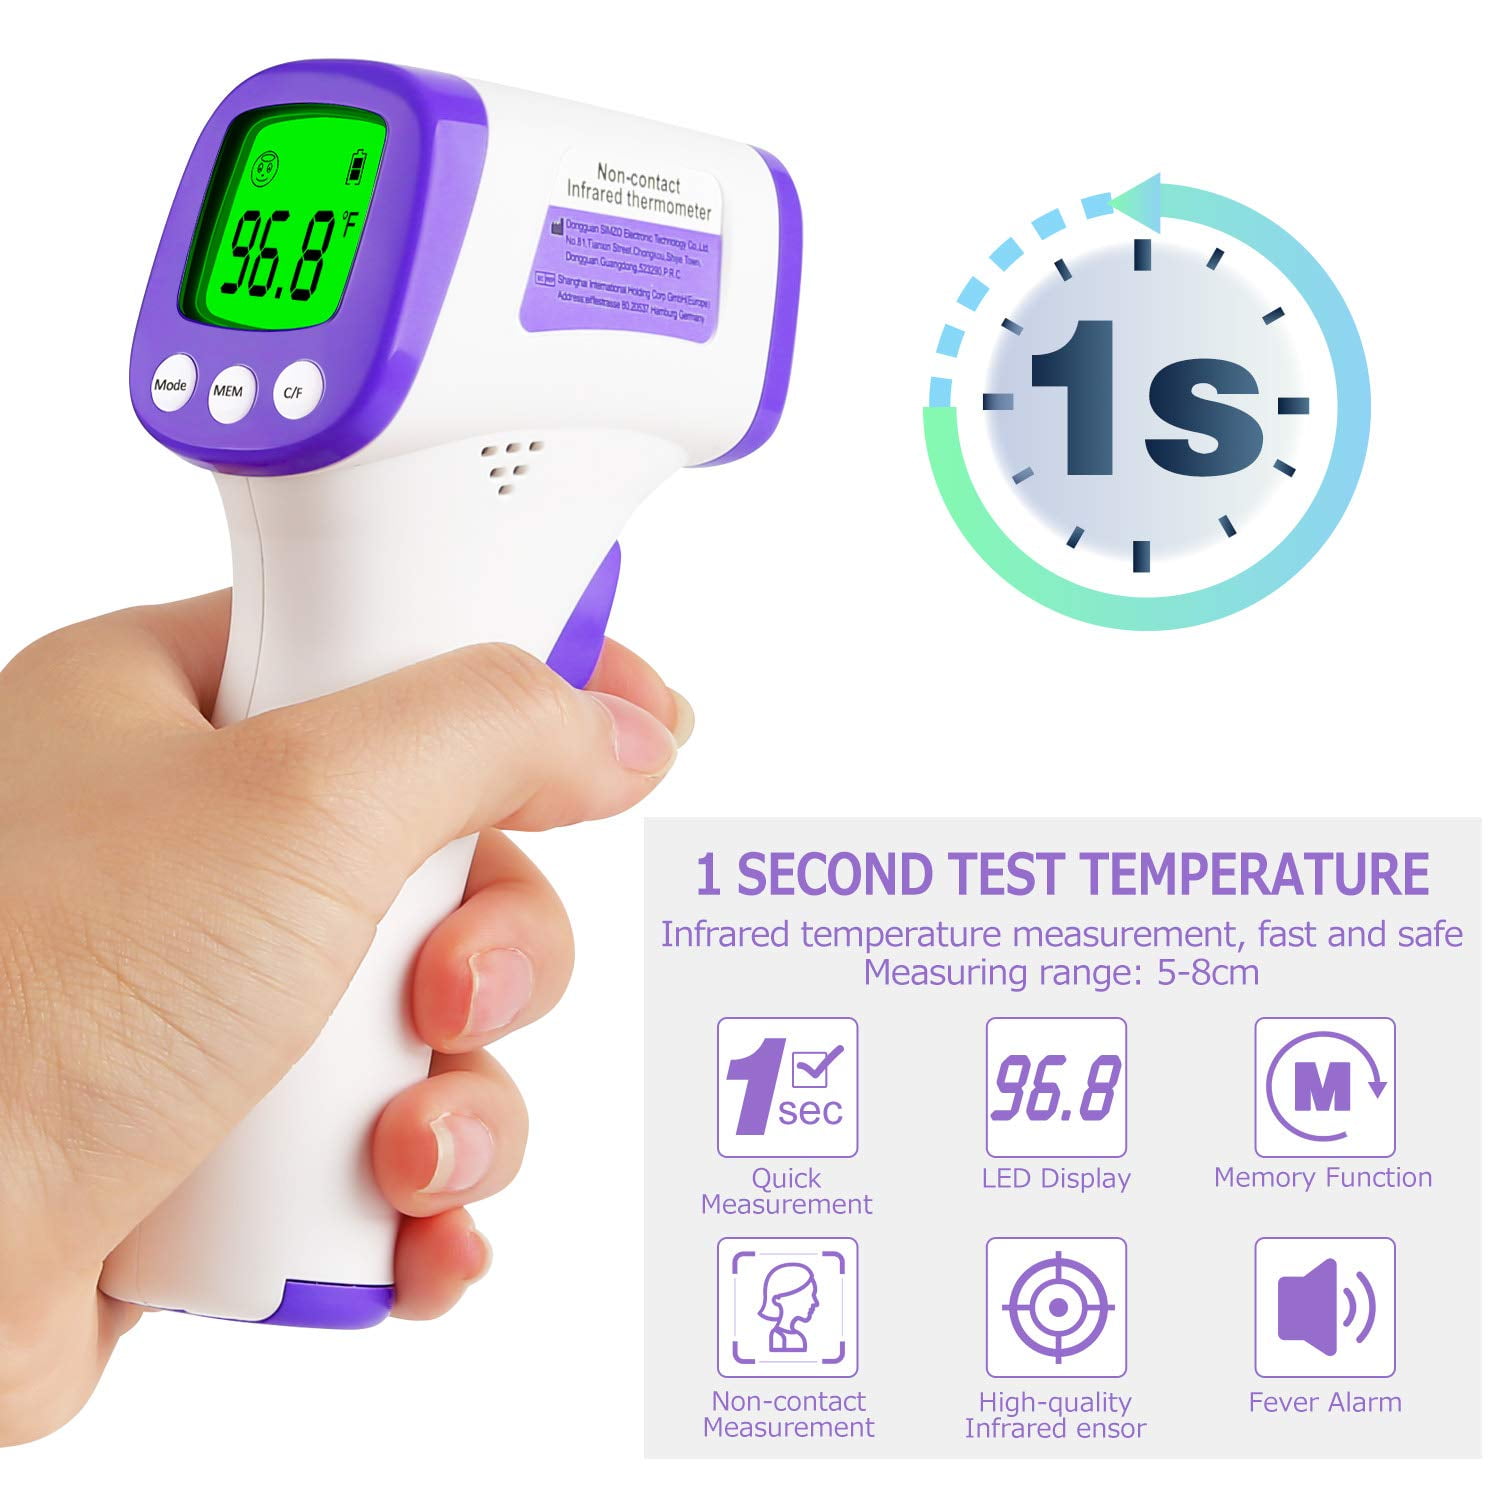 1s Instant Accurate Reading by The Thermometer Touchless Forehead Thermometer for Adults and Babies Digital Infrared Non-Contact Thermometer with Fever Indicator Kids 